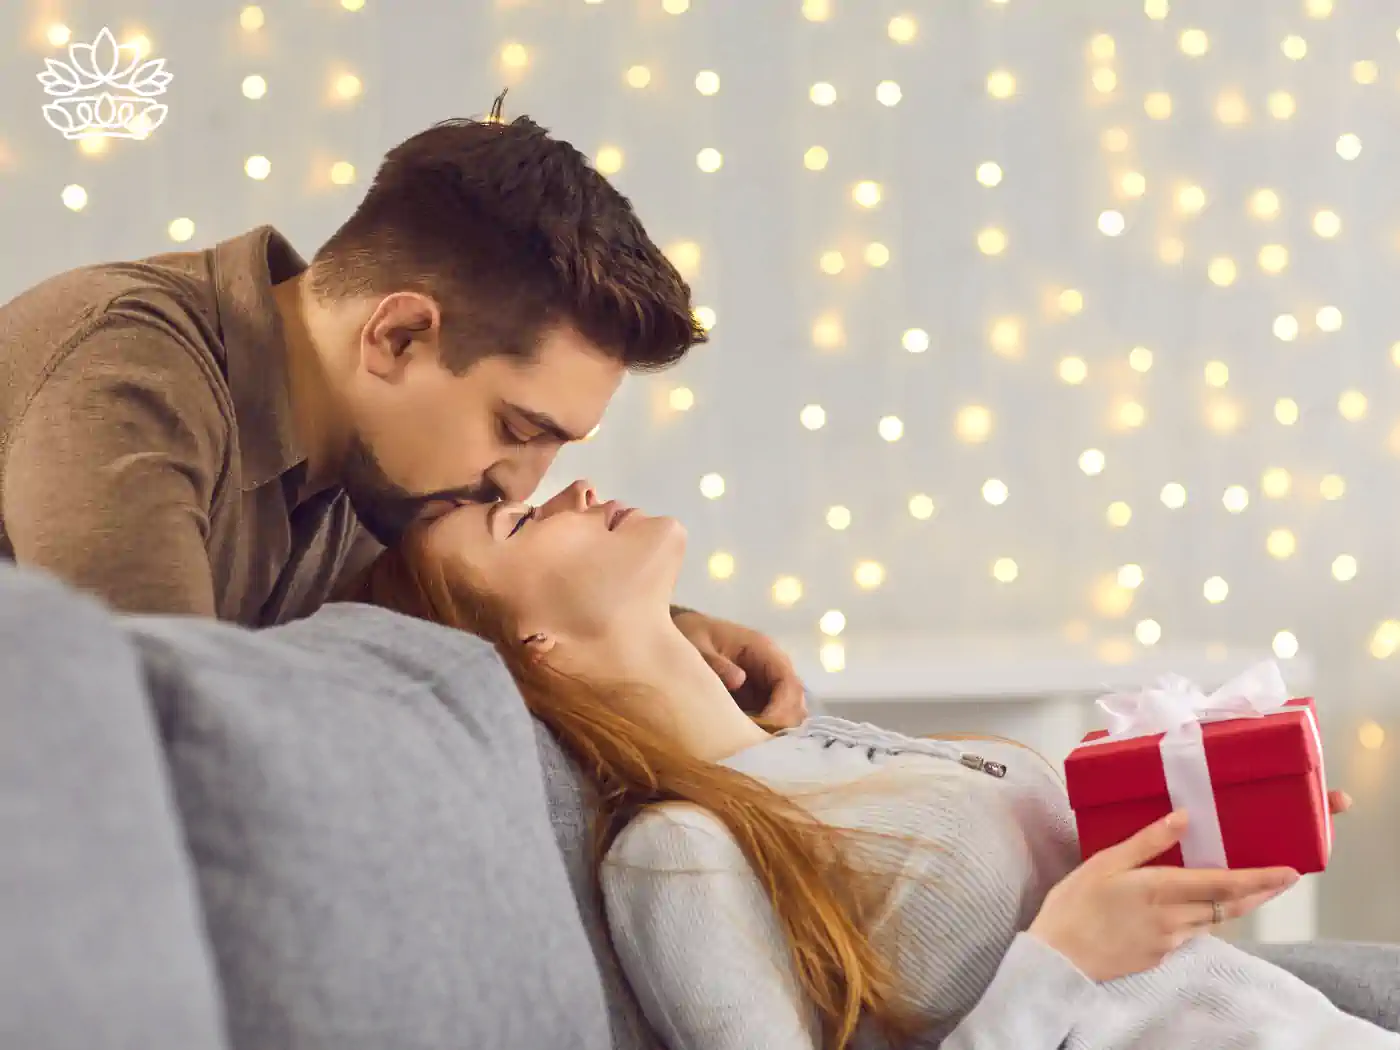 Romantic couple sharing a tender moment with a Valentine's Day gift, surrounded by festive lights. Fabulous Flowers and Gifts.